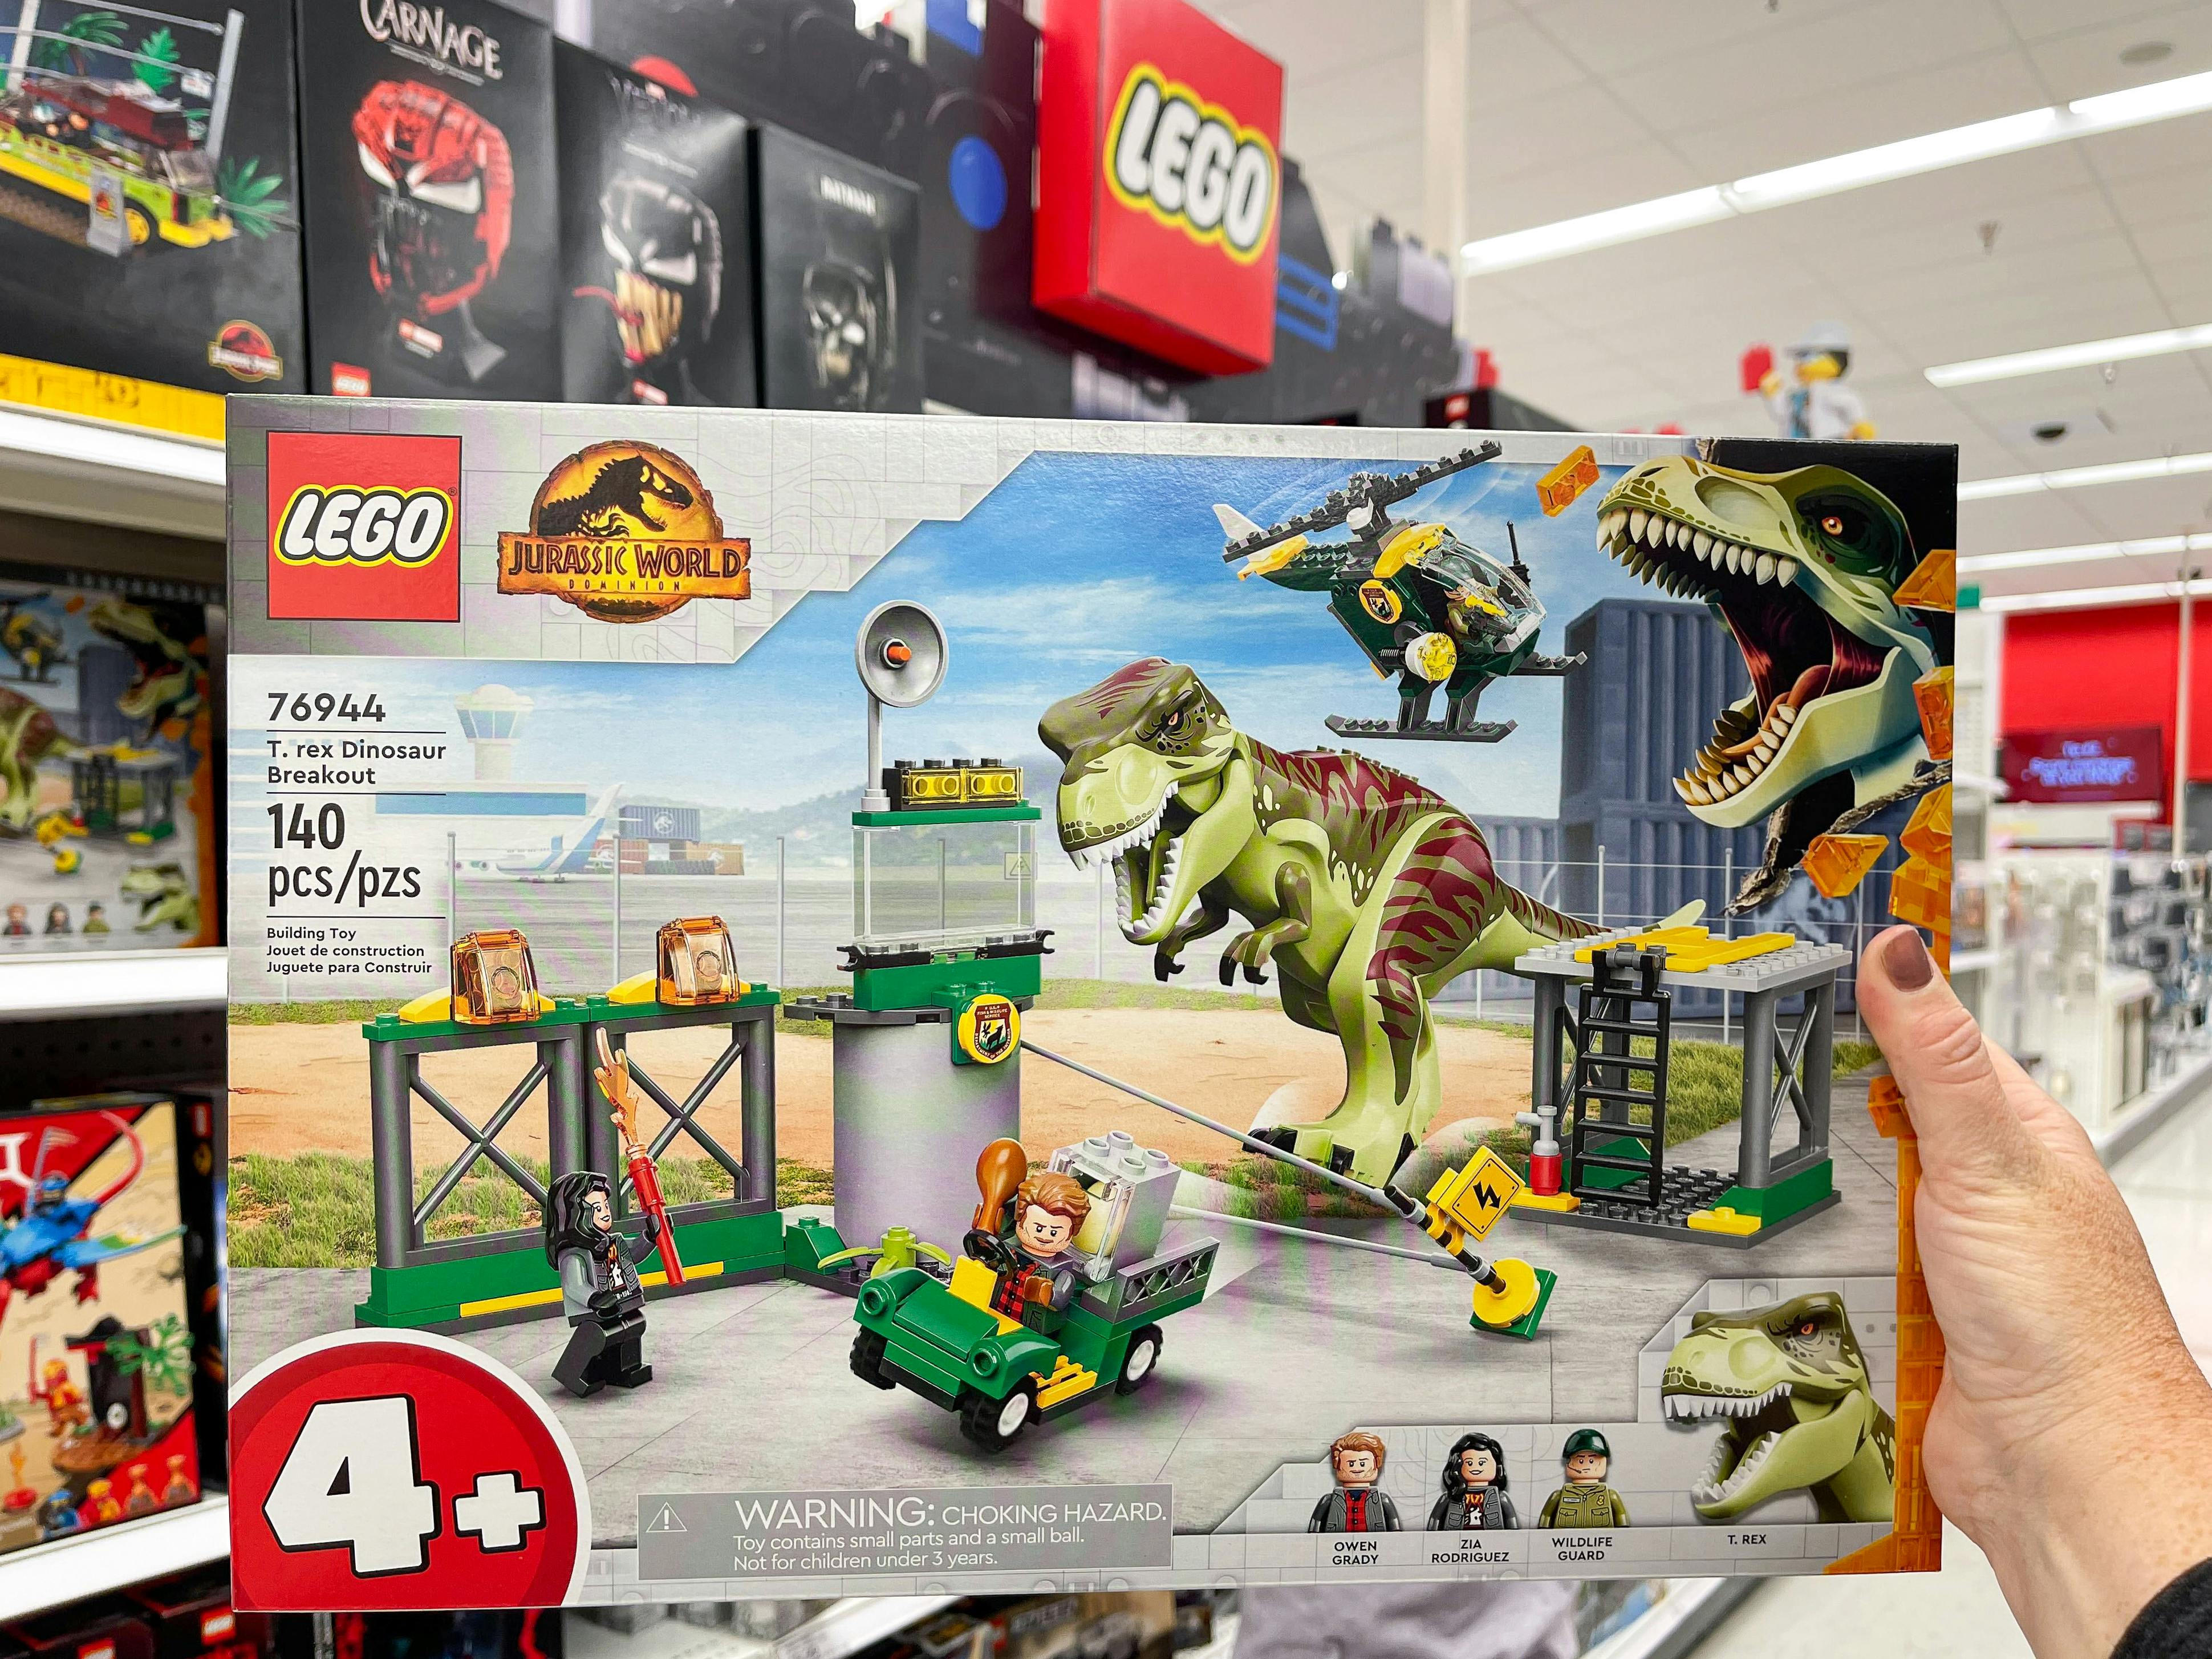 Best LEGO Black Friday Deals in - The Krazy Coupon Lady